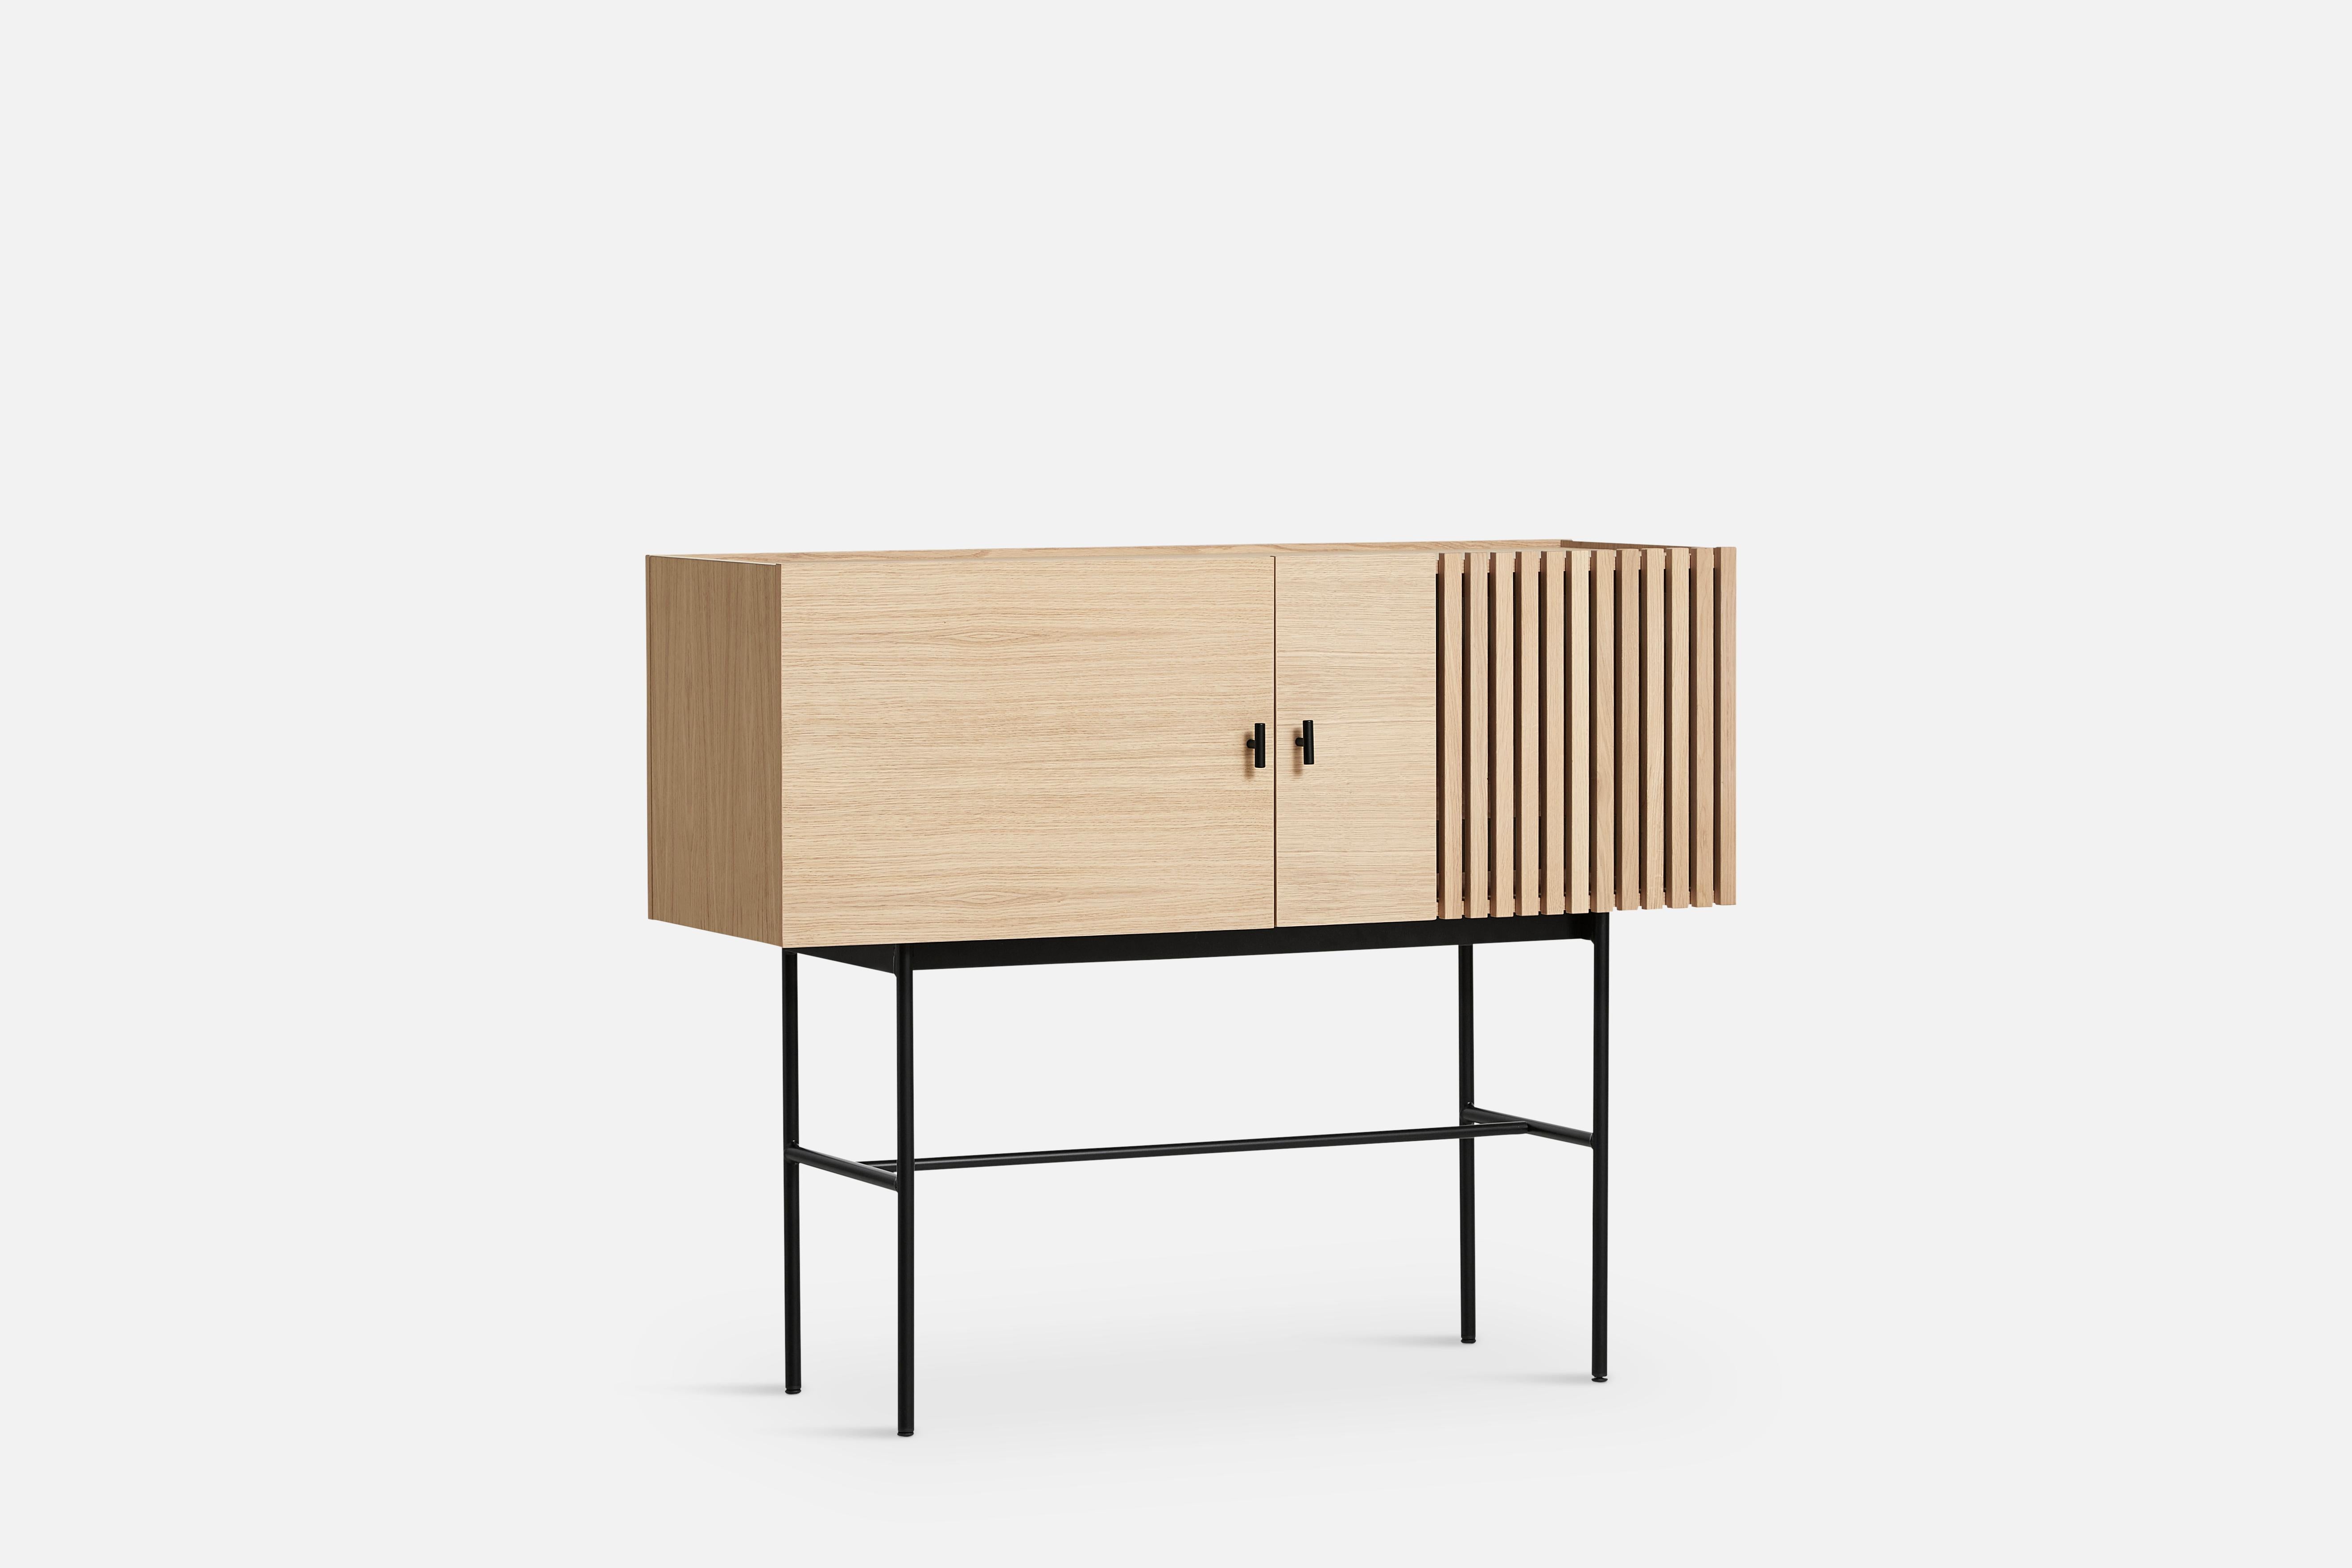 White Oak Array sideboard 120 by Says Who
Materials: Oak, Metal
Dimensions: D 44 x W 120 x H 97 cm
Also available in different colors and materials. 

The founders, Mia and Torben Koed, decided to put their 30 years of experience into a new